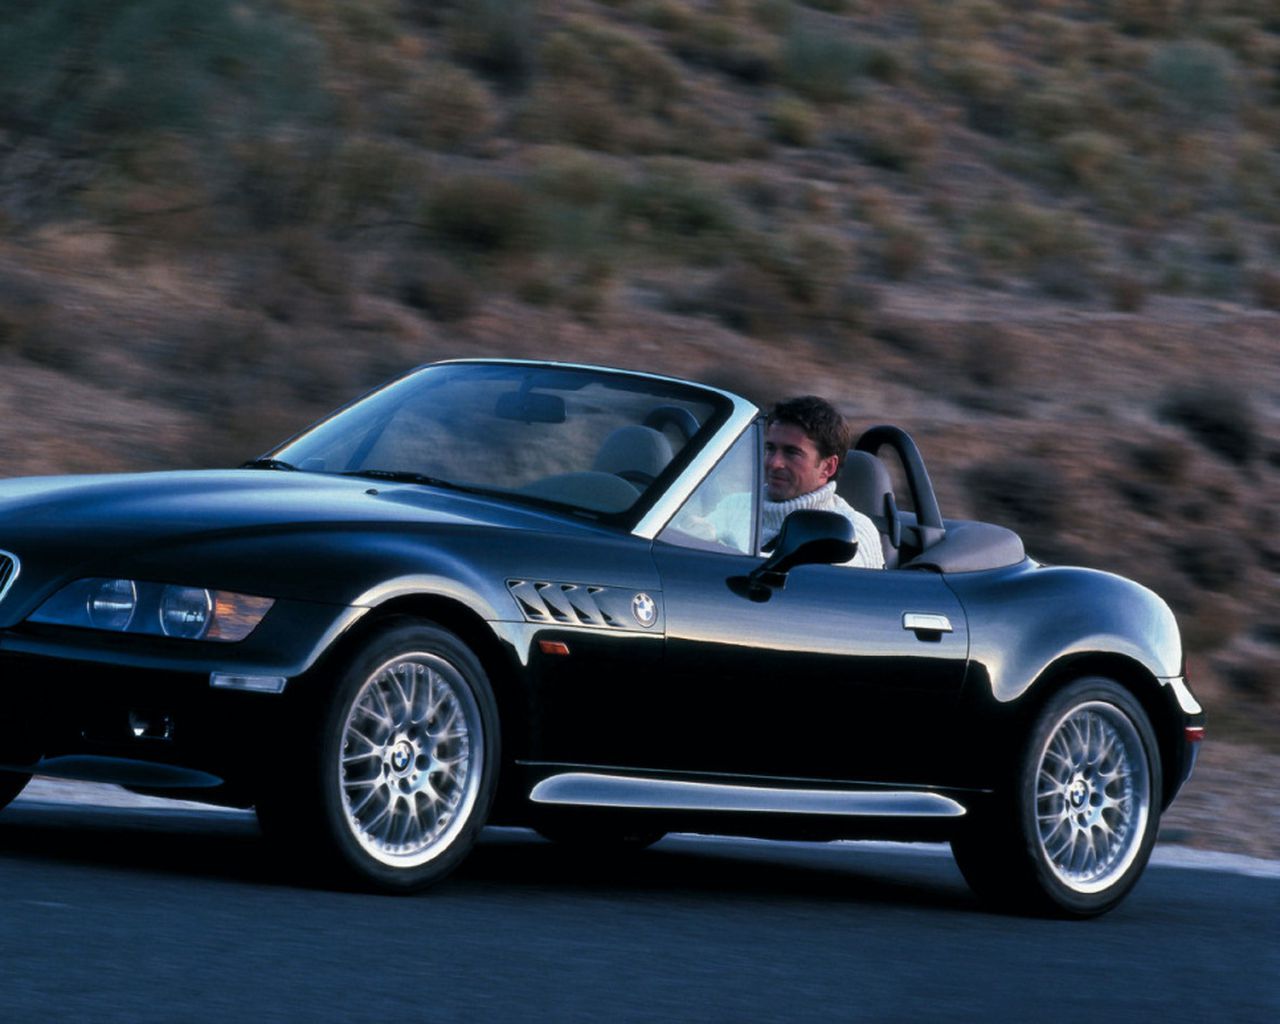 BMW Z3 2000 has a negative camber issue | The Star